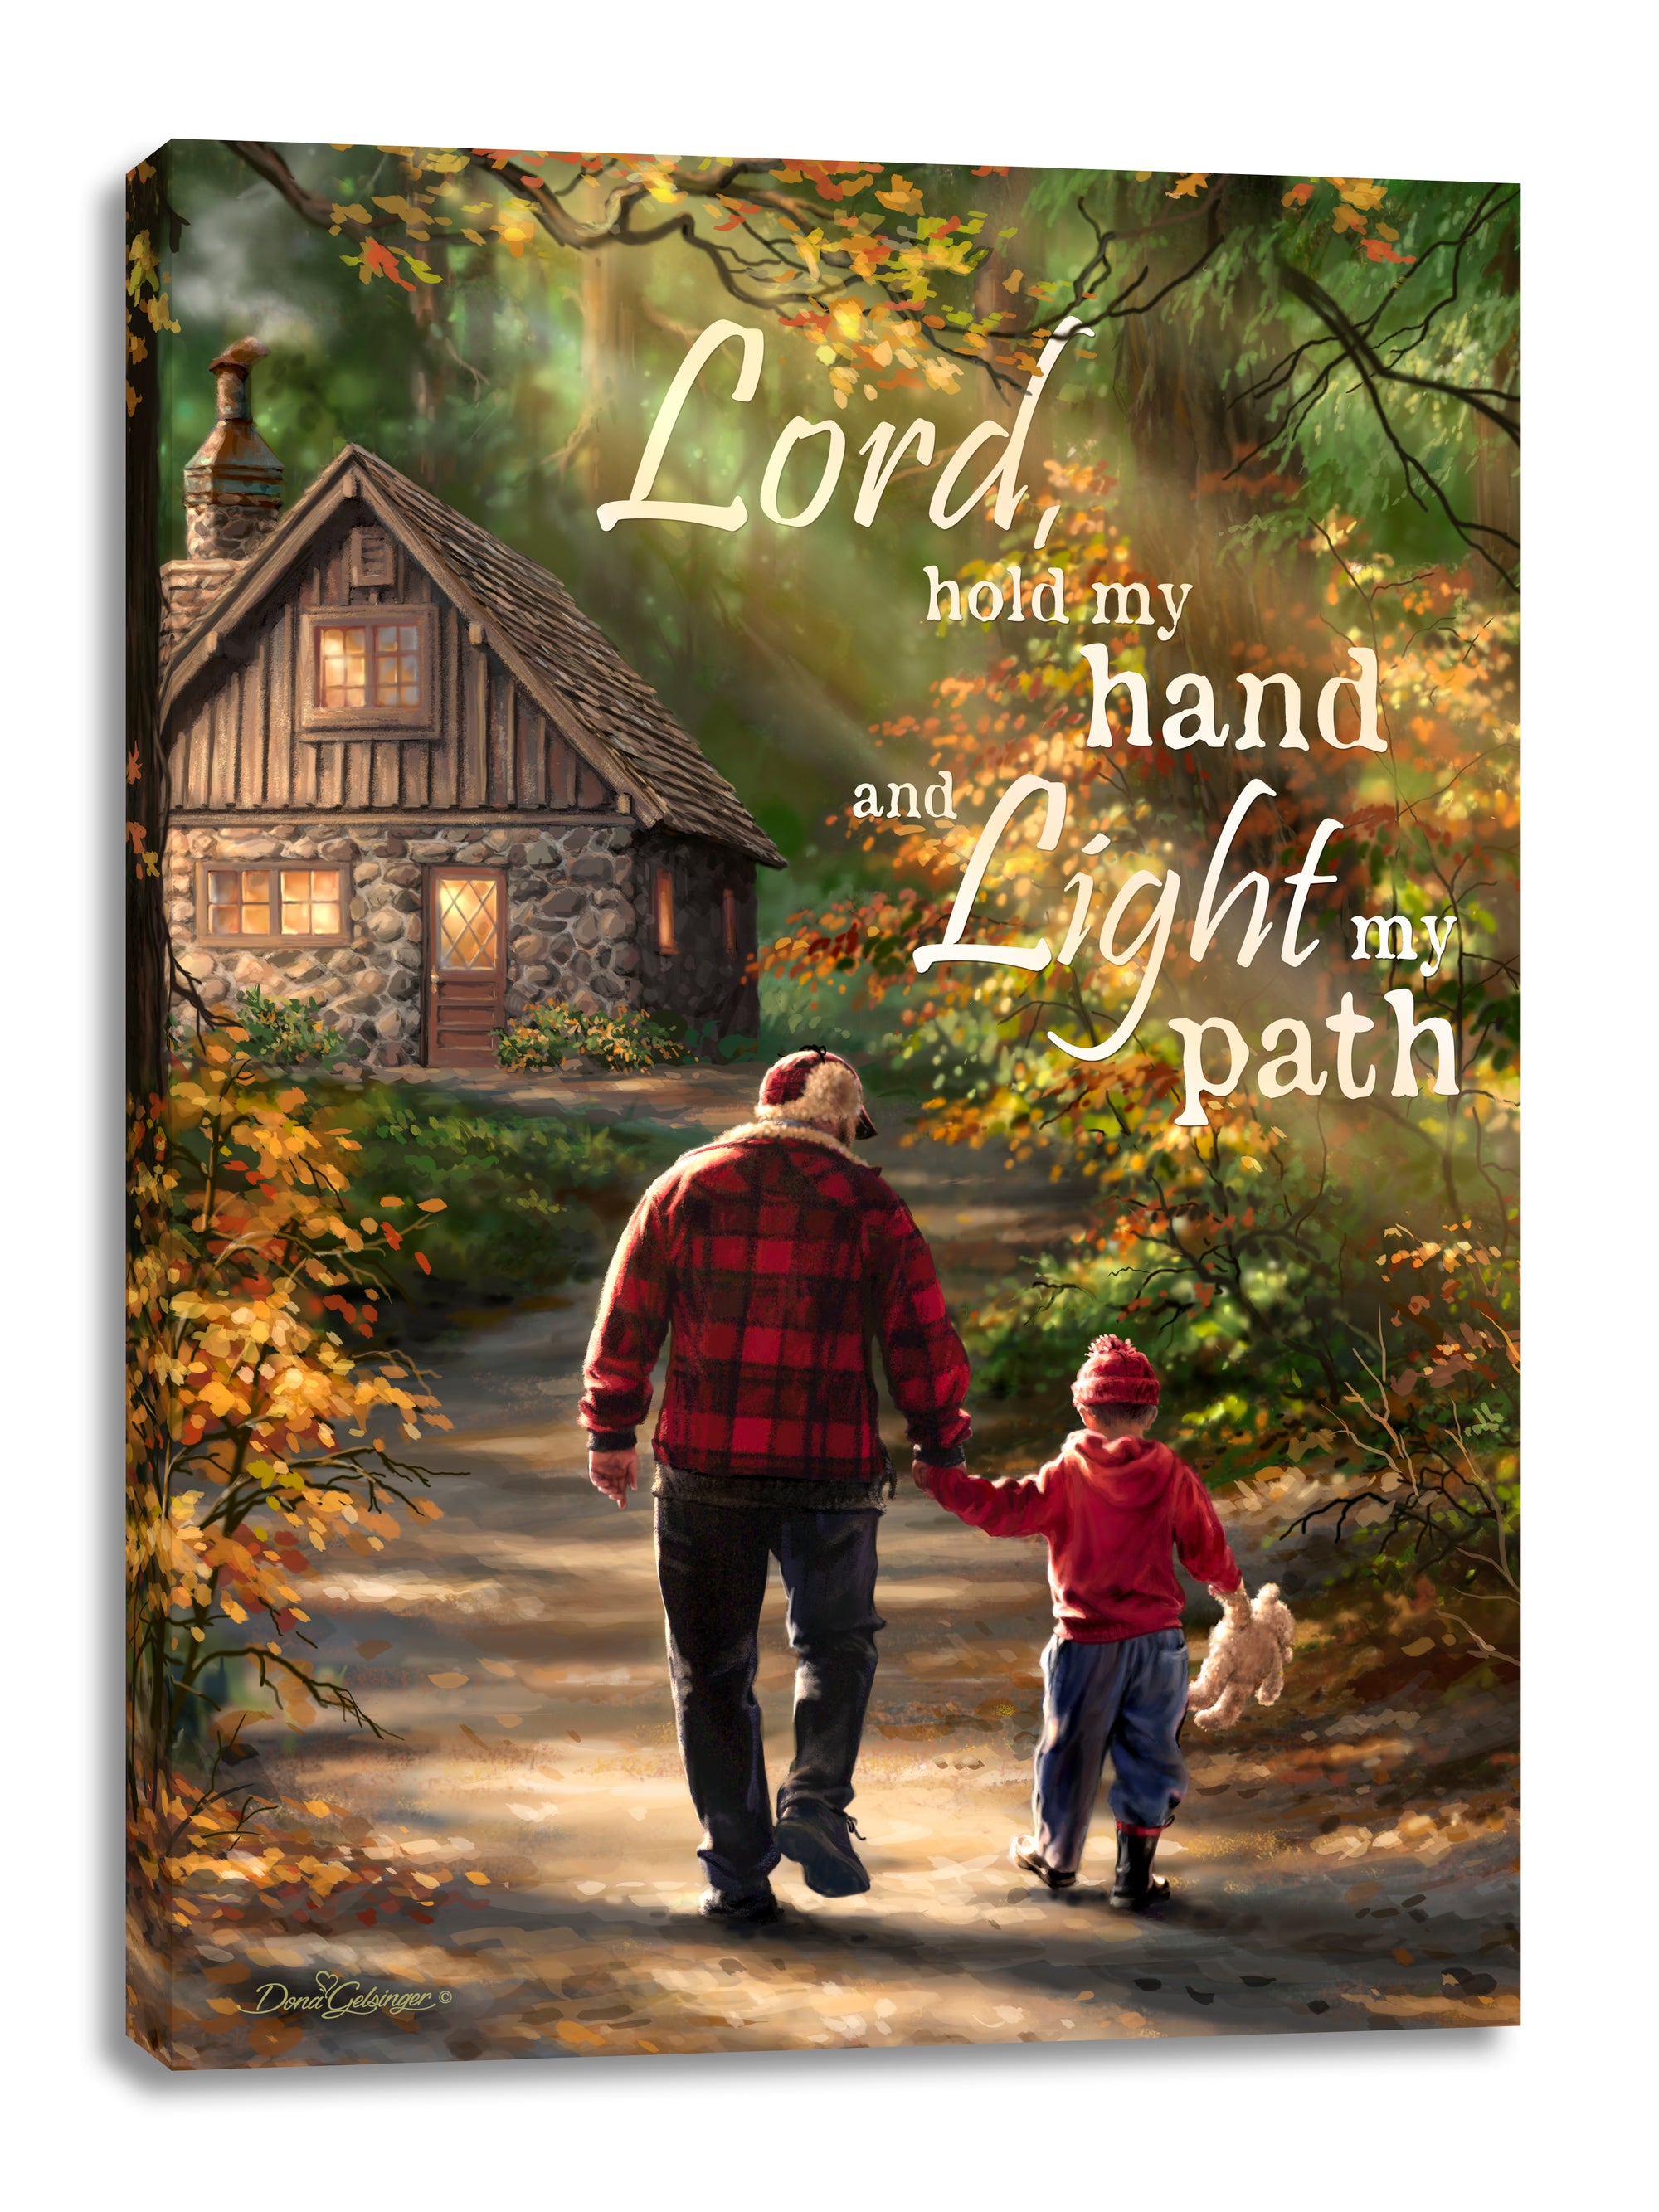 This exquisite piece captures the heartwarming scene of a father and his son walking hand in hand down a winding path, surrounded by the lush forest. The boy clutches onto his beloved teddy bear, a symbol of innocence and wonder.